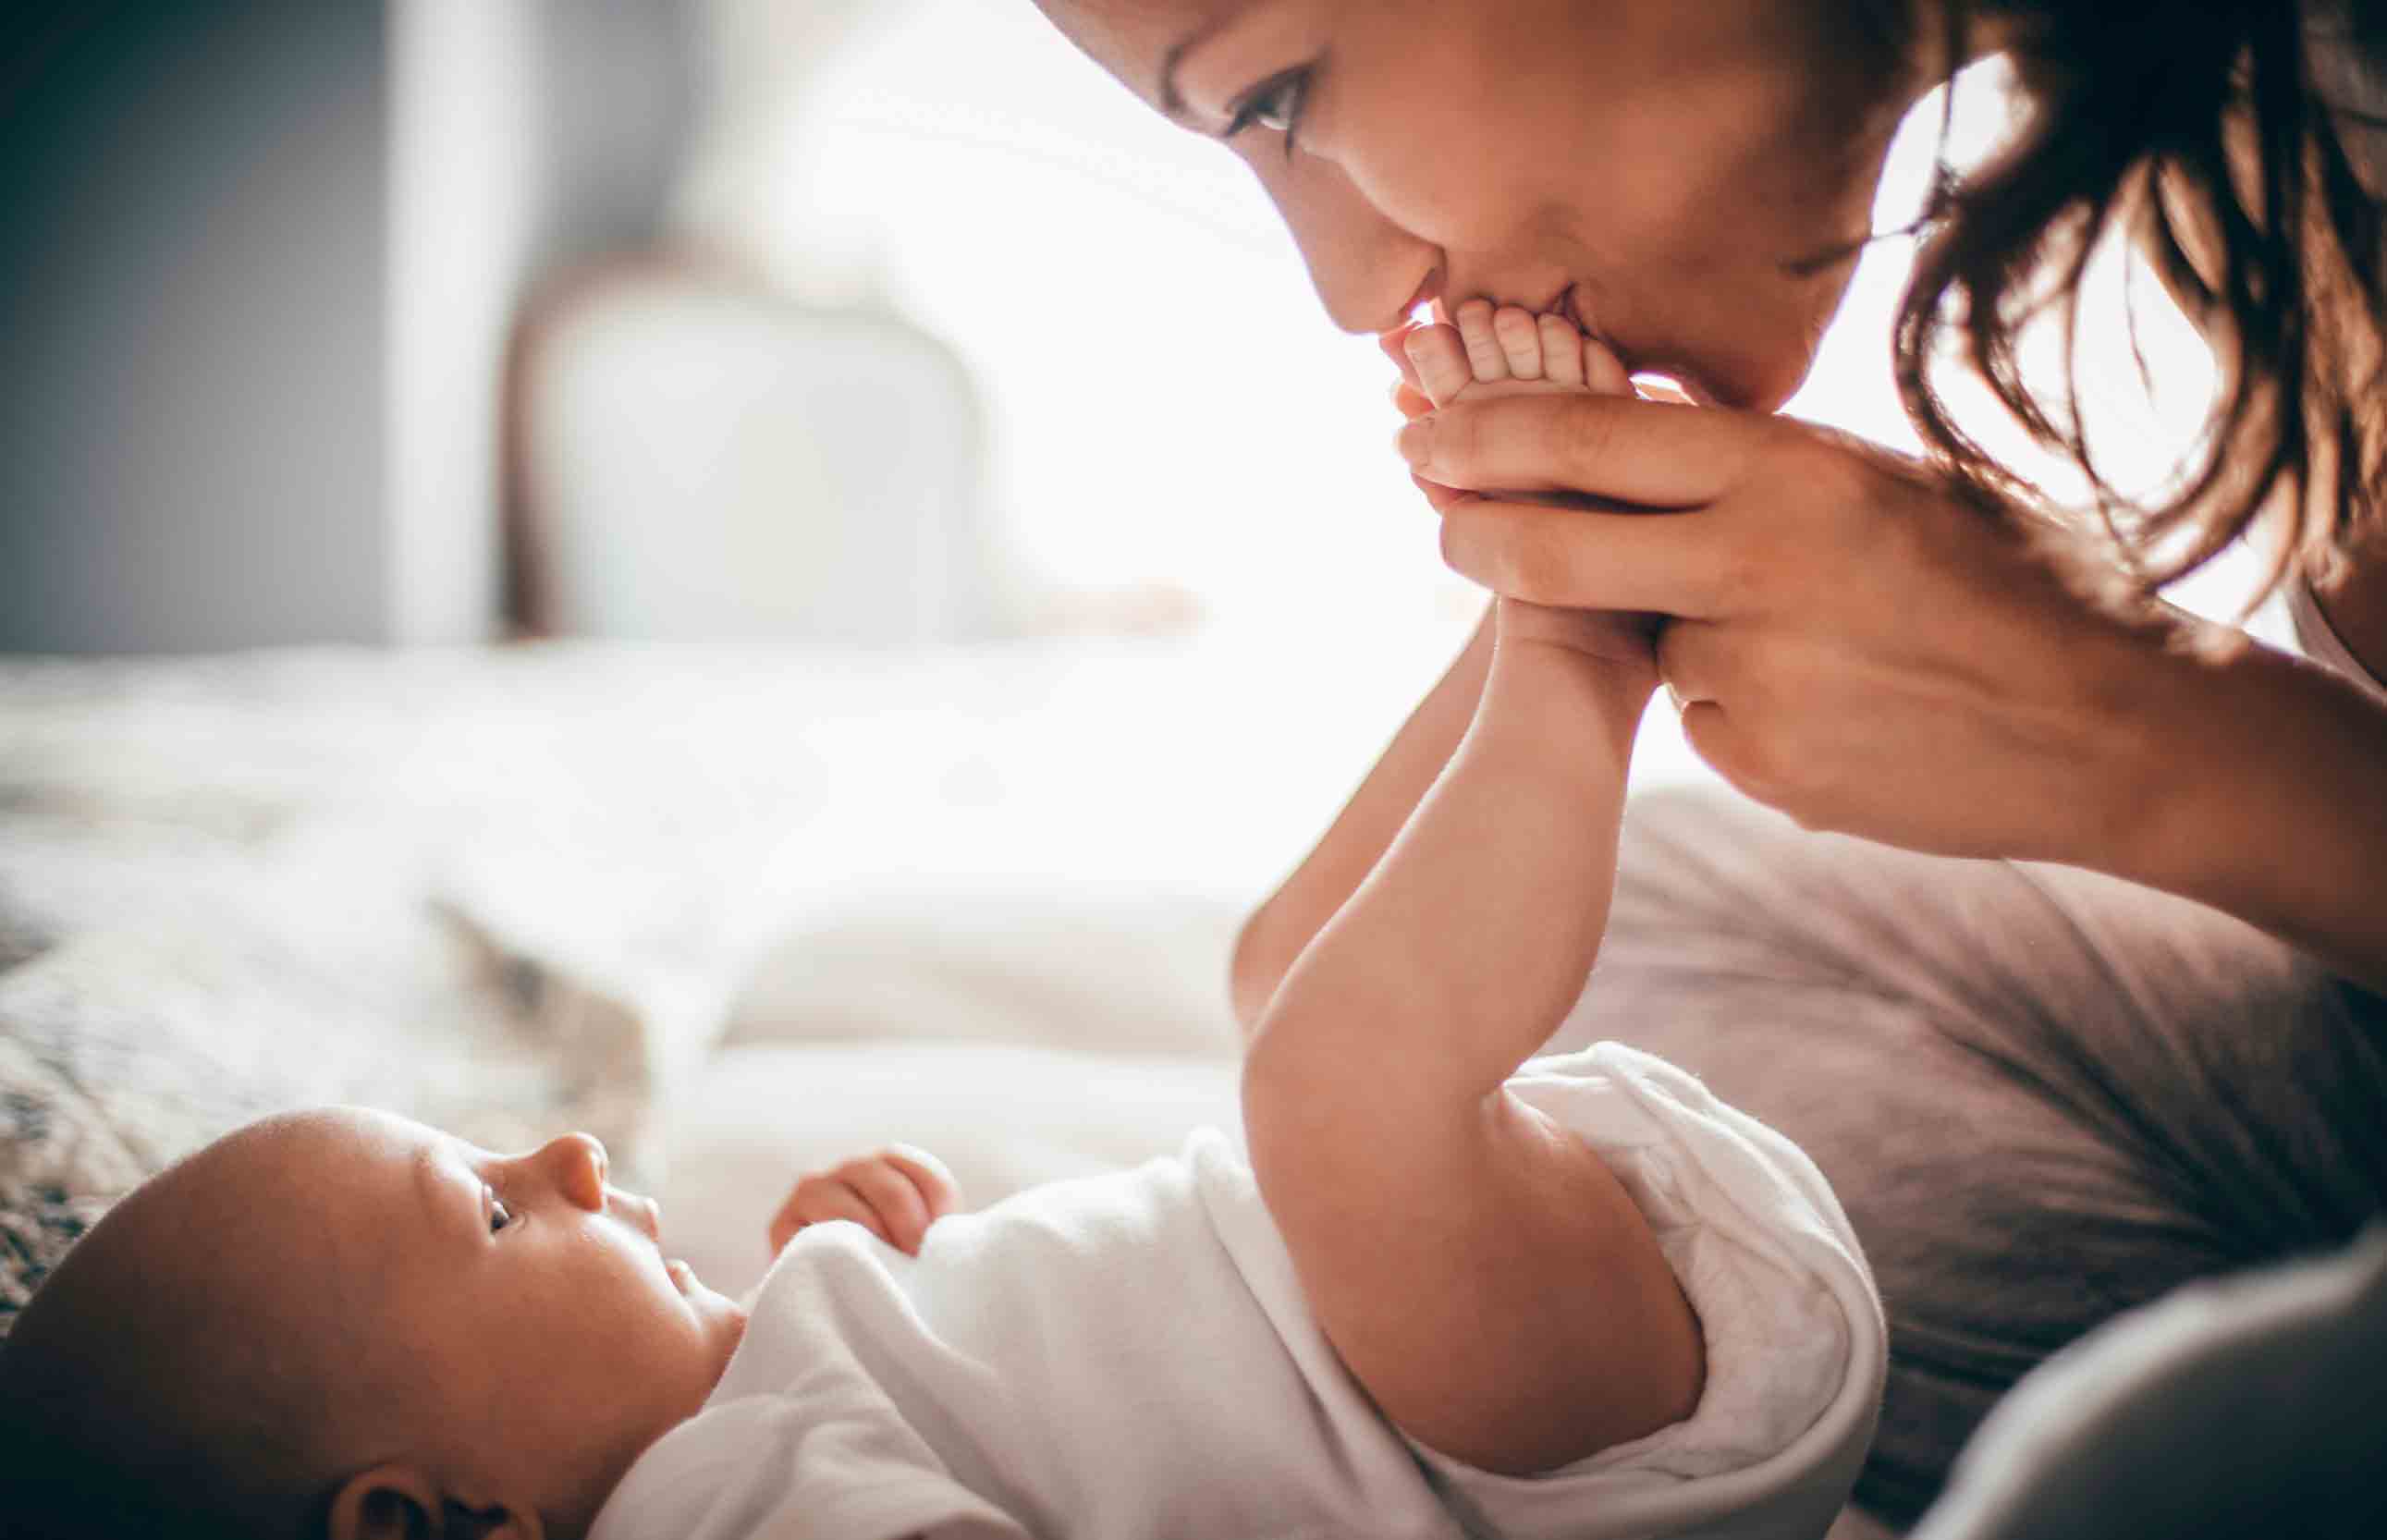 A new mom and personal finance expert shares the new money lessons she learned from baby.